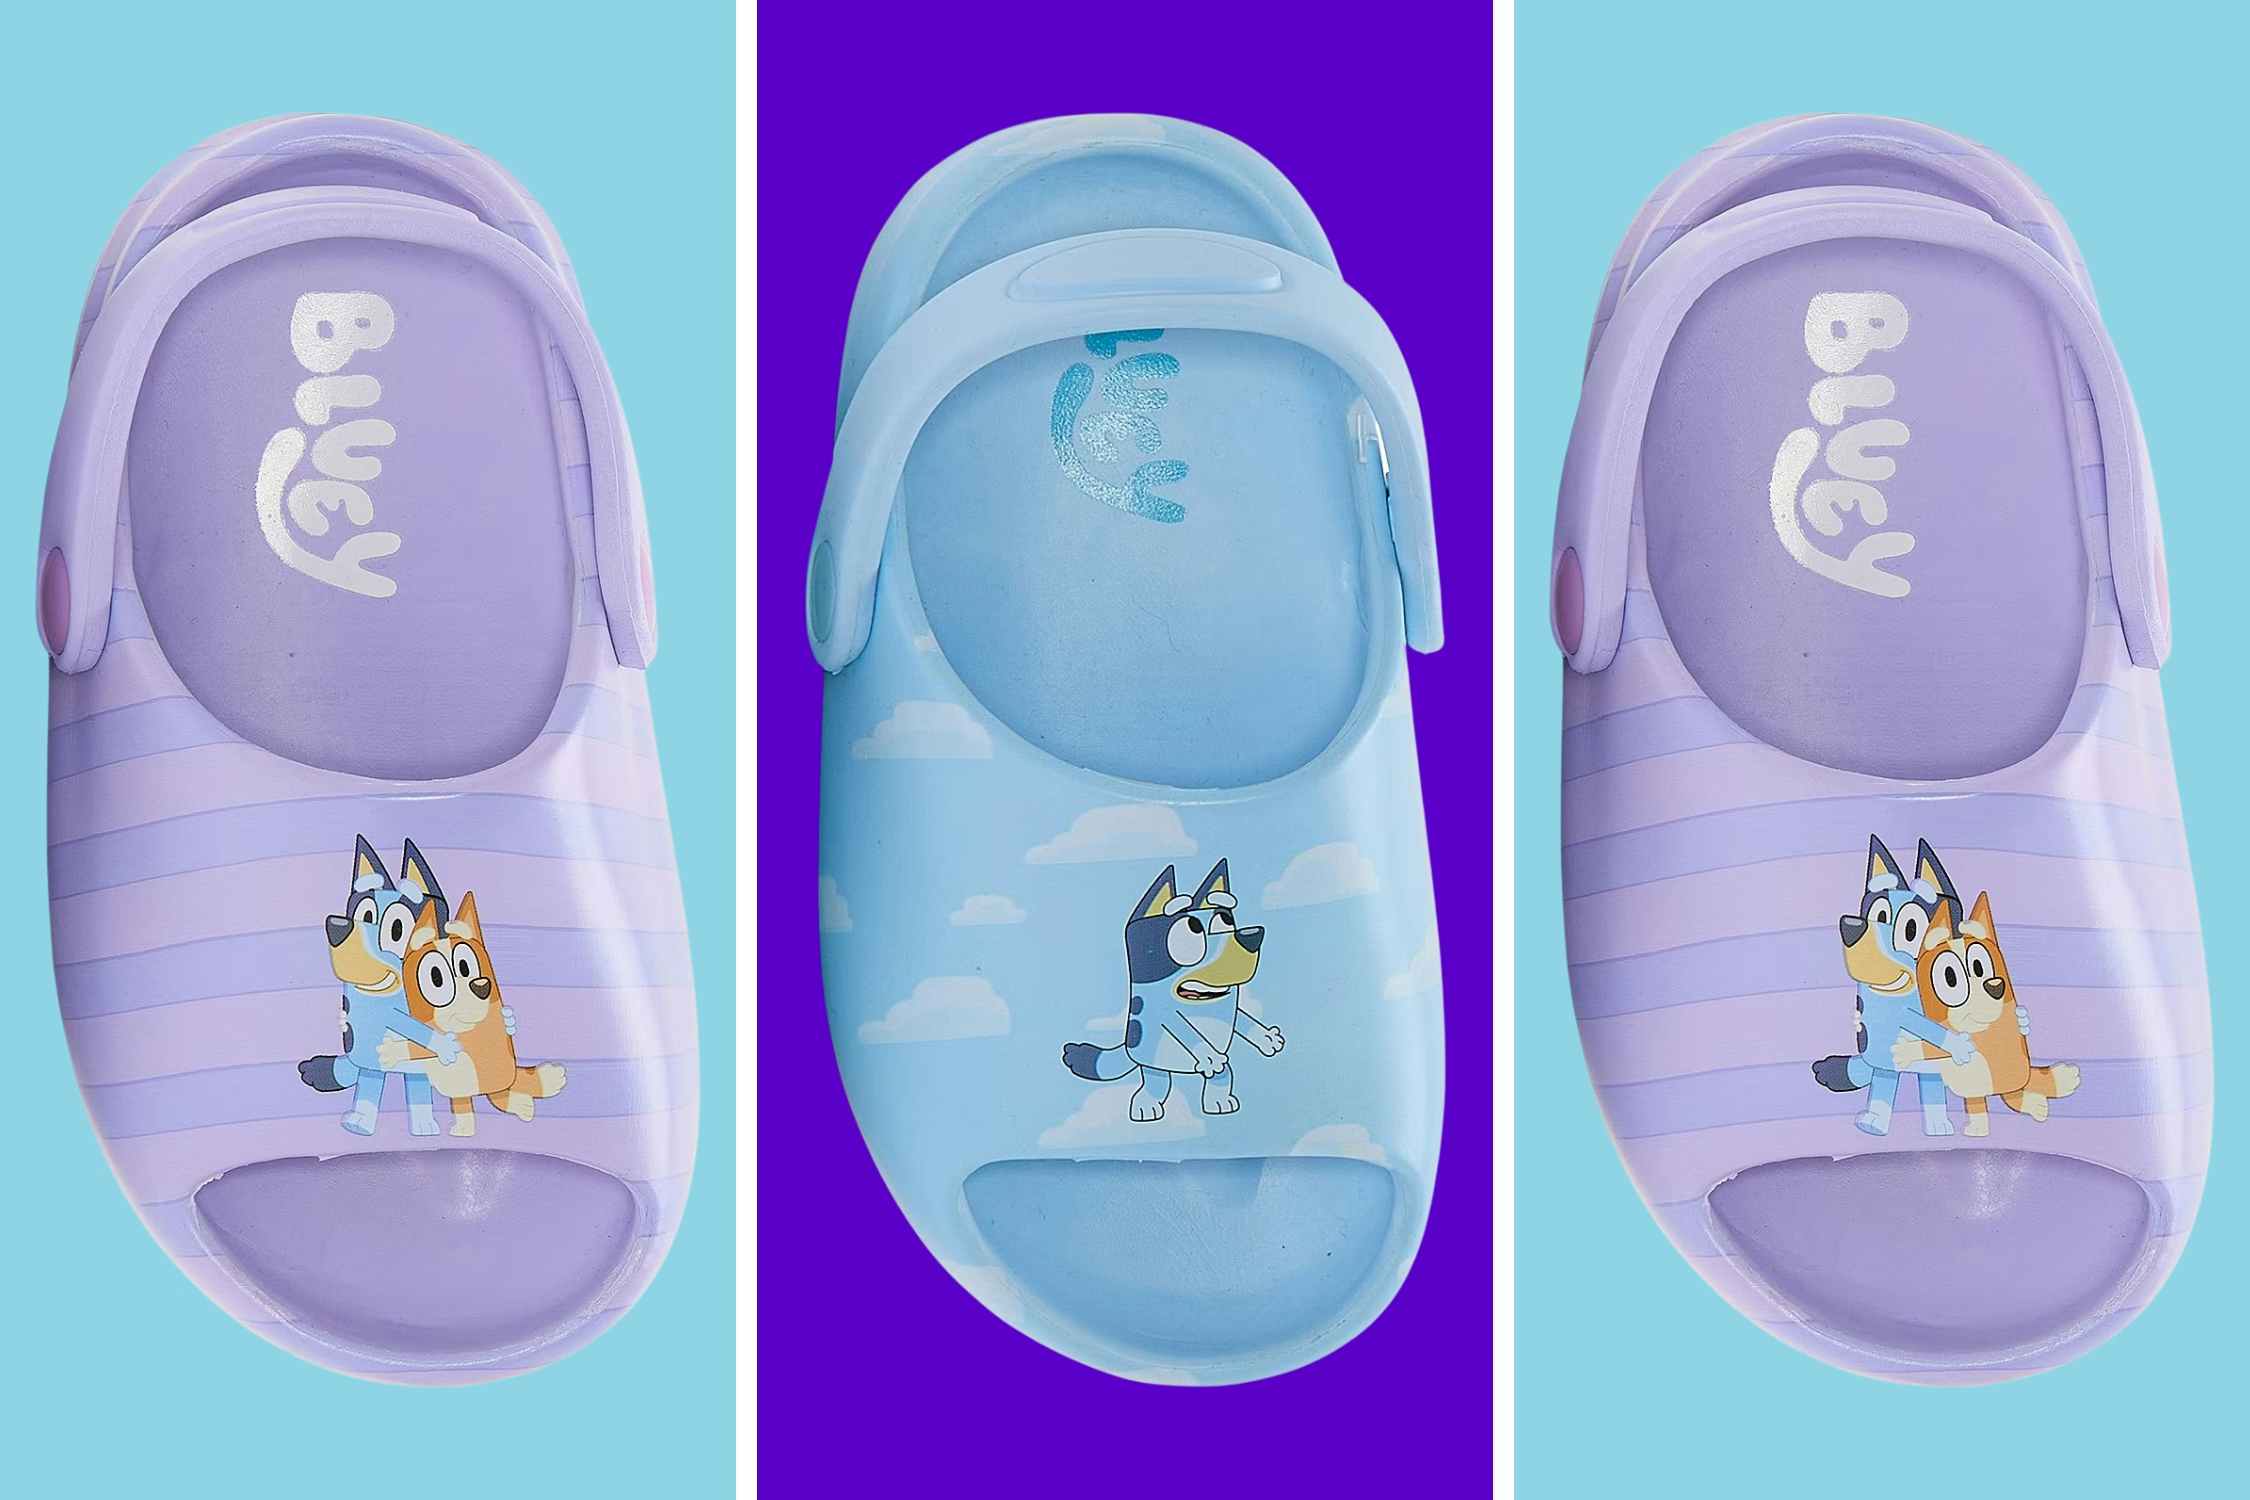 Grab the Newly Released Bluey Clogs for Just $19 at JCPenney With Code